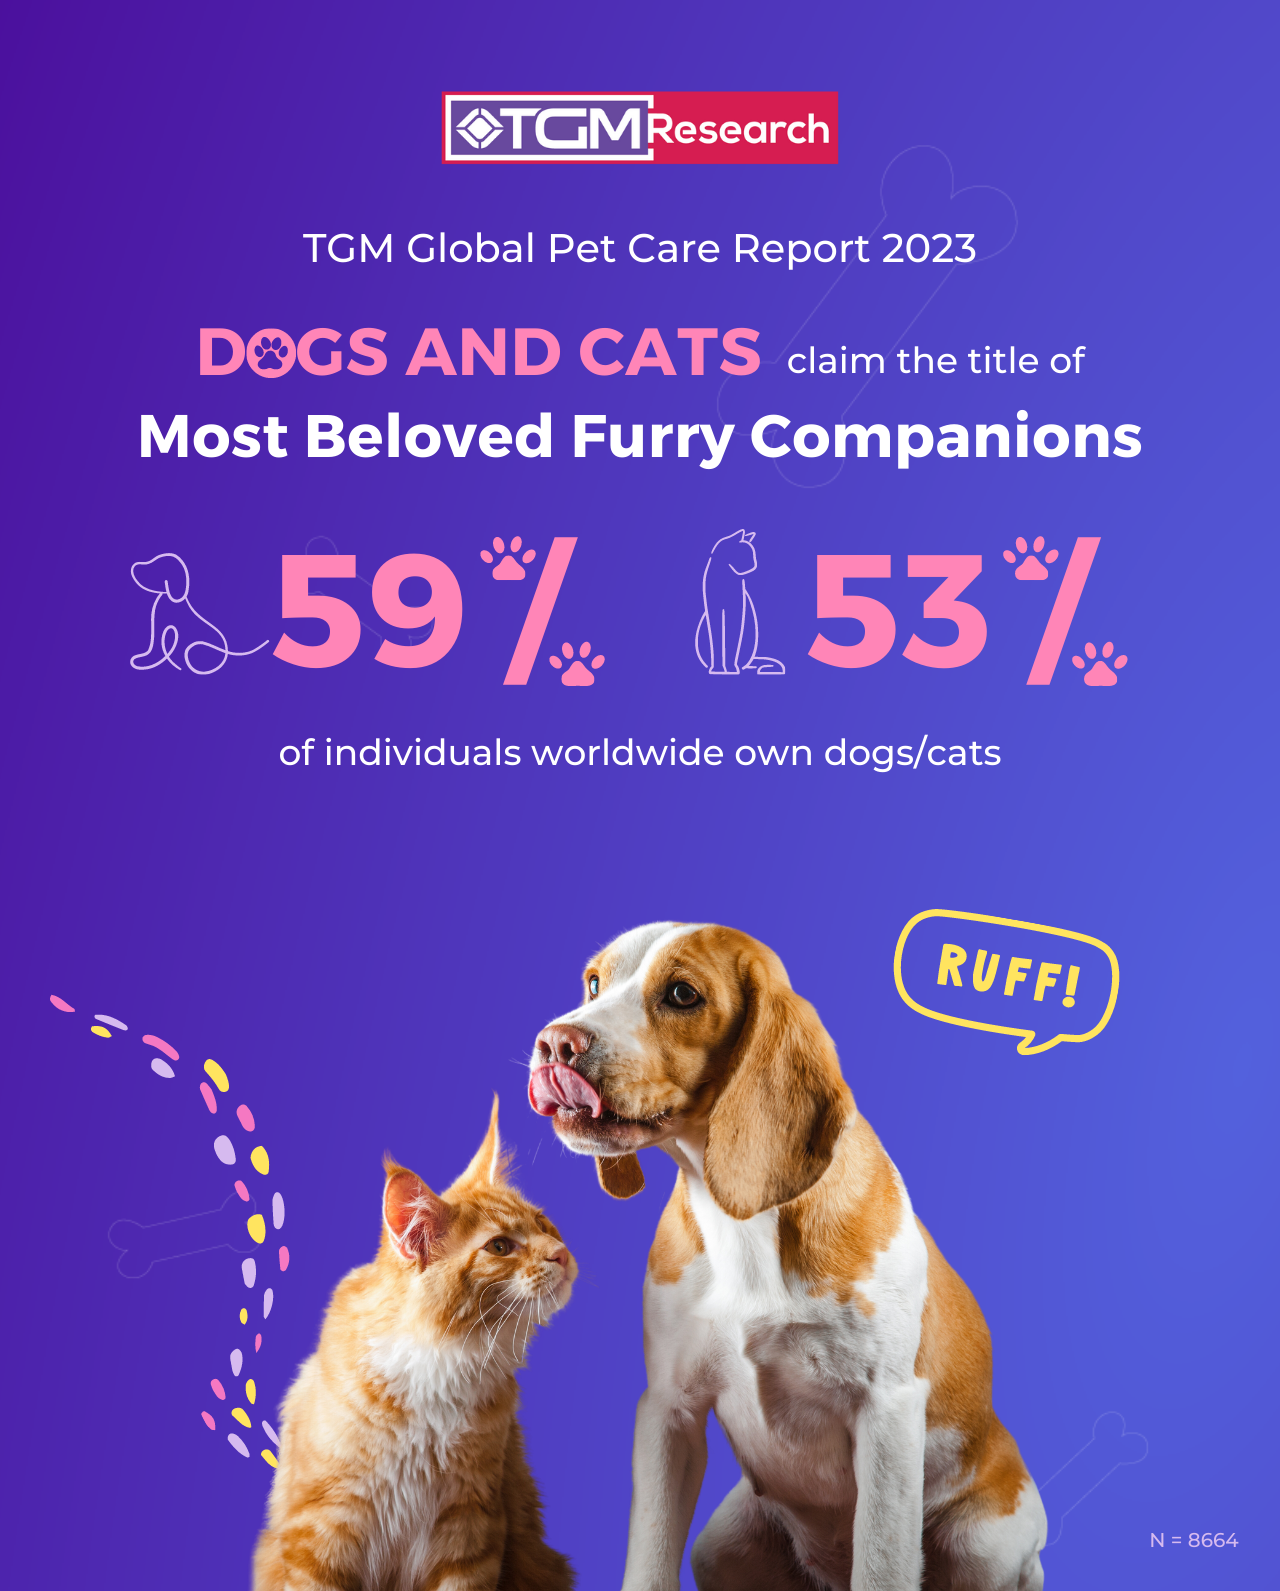 Dogs and Cats Claim the Title of Most Beloved Furry Companions